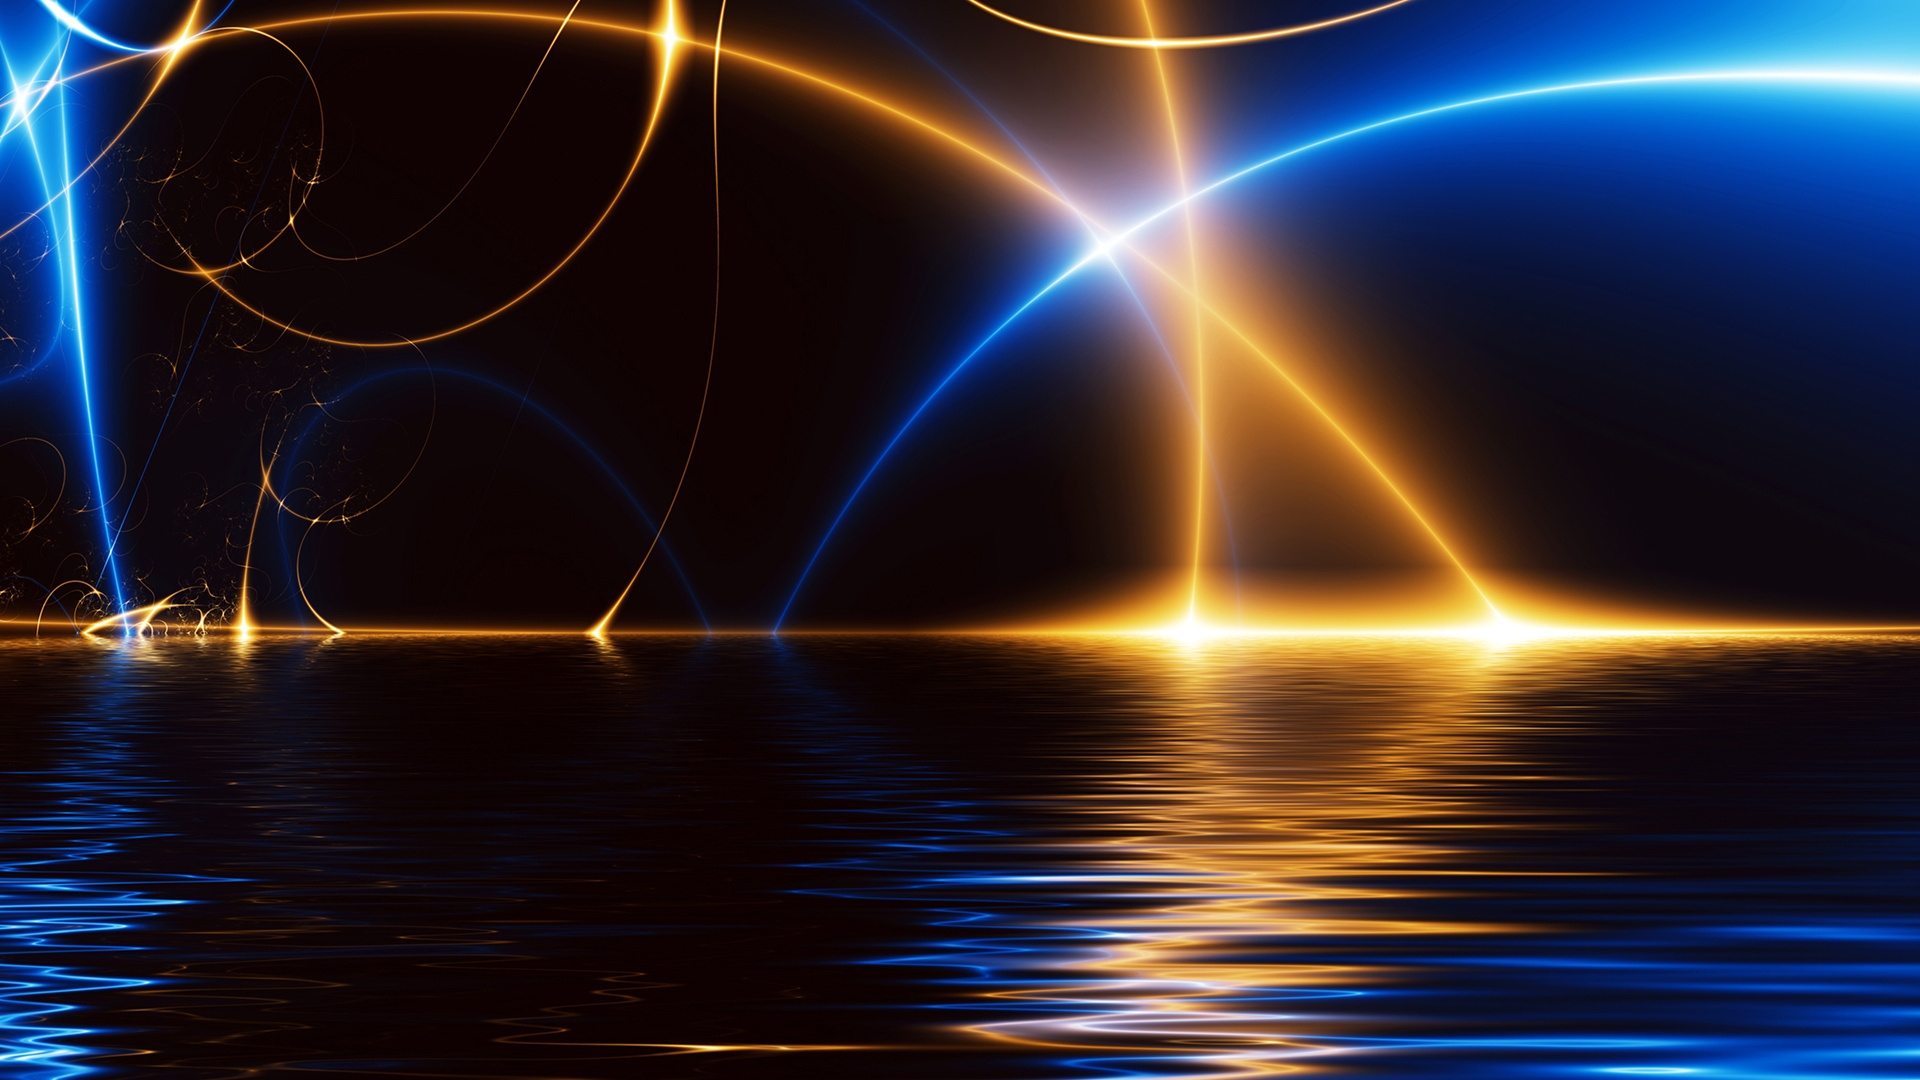 Download 1920x1080 Colorful Light Rays, Water, Waves, Reflection Wallpaper for Widescreen